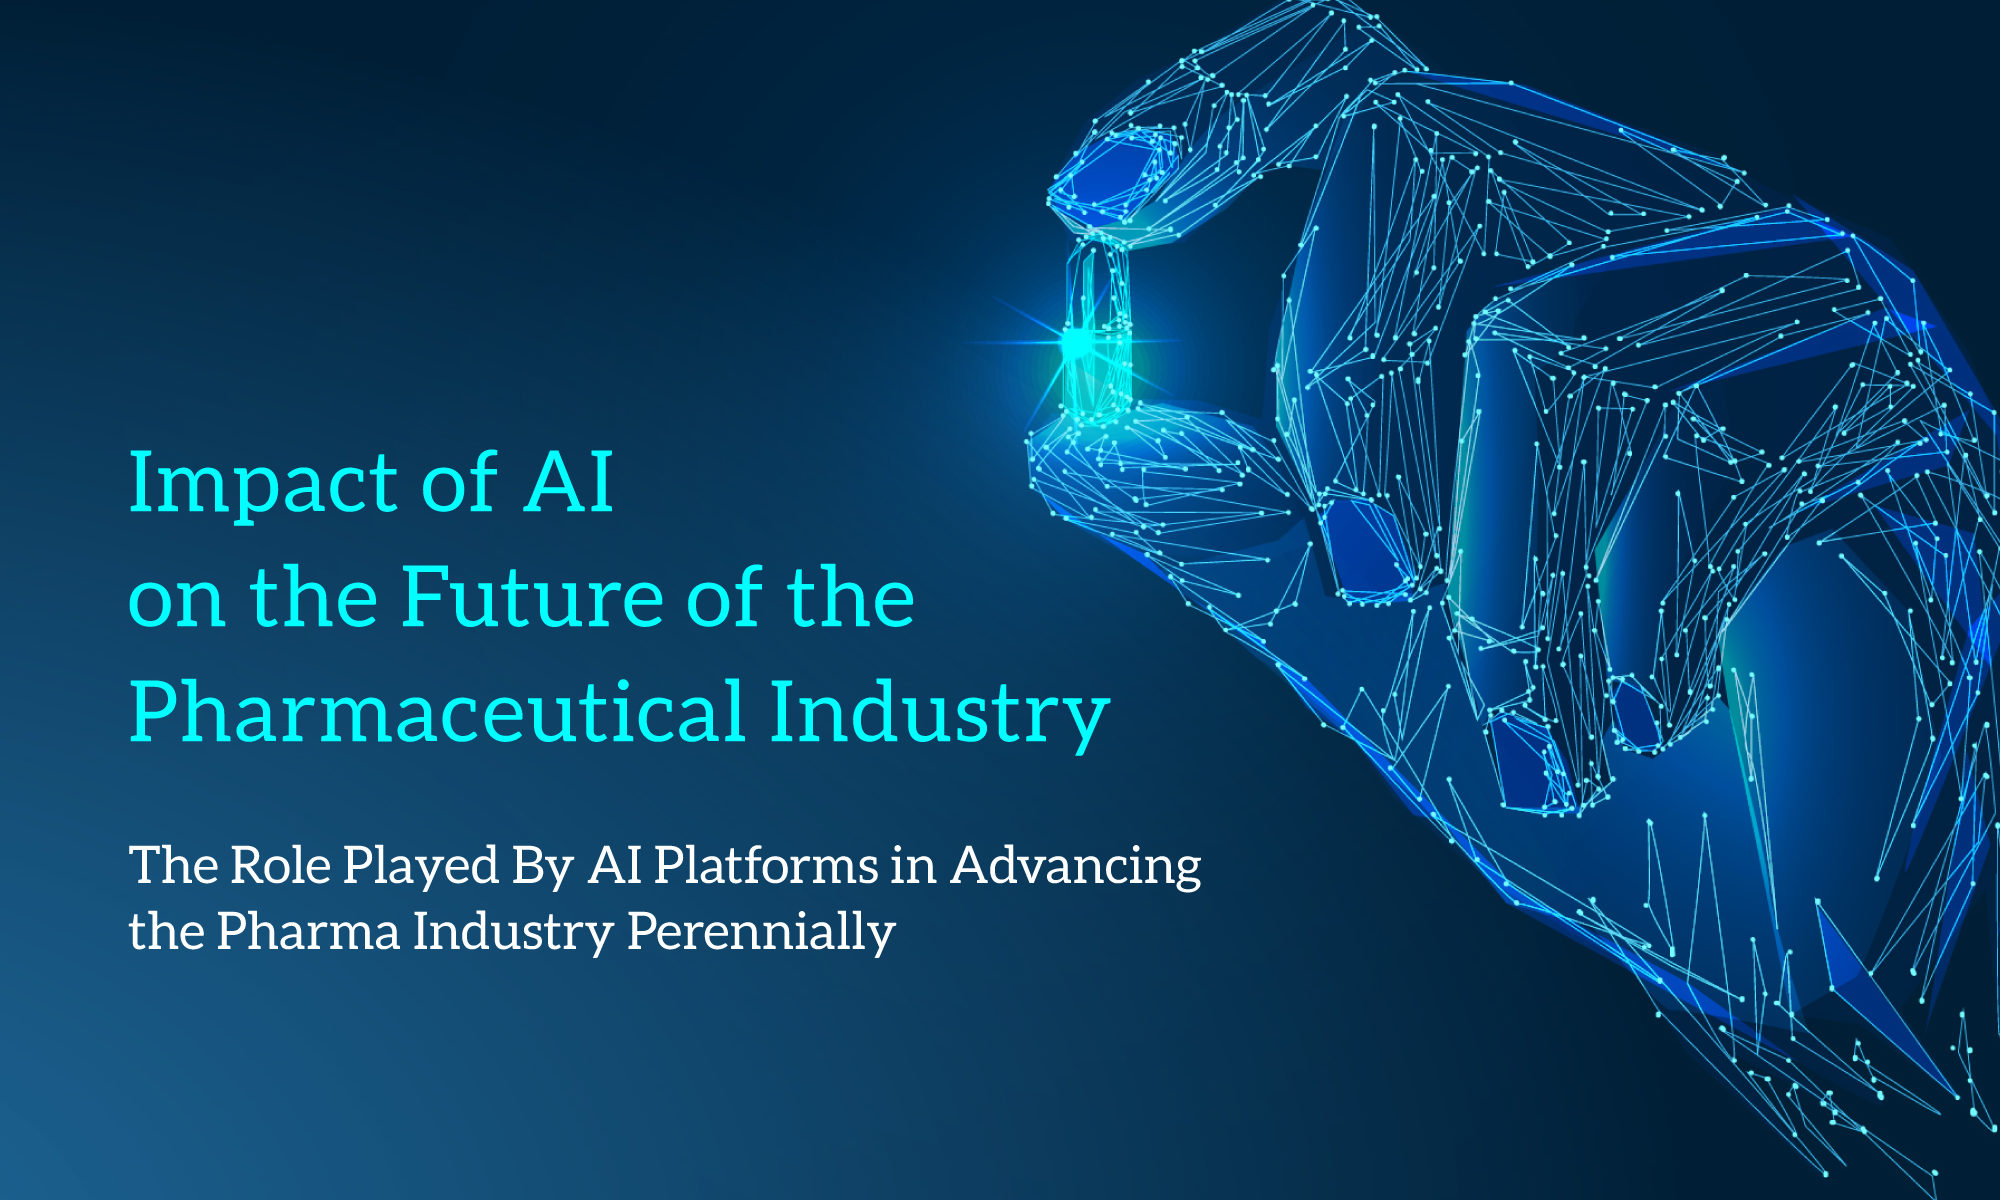 Major Role of AI in the Future of Pharmaceuticals